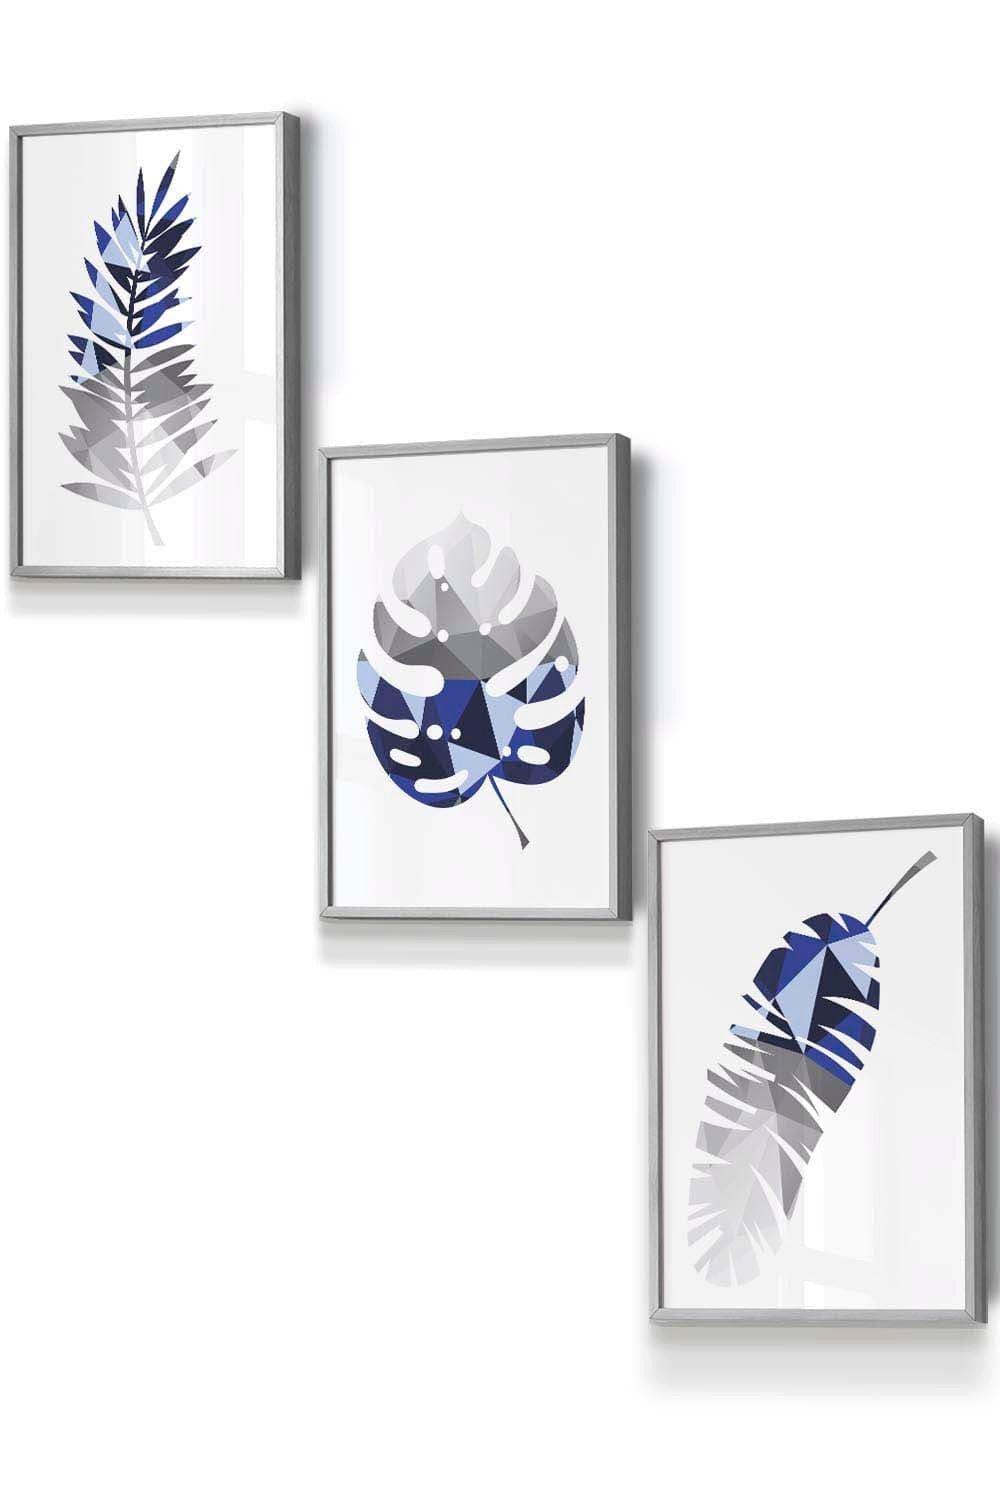 Geometric Tropical Leaves In Navy Blue Grey Framed Wall Art - Small